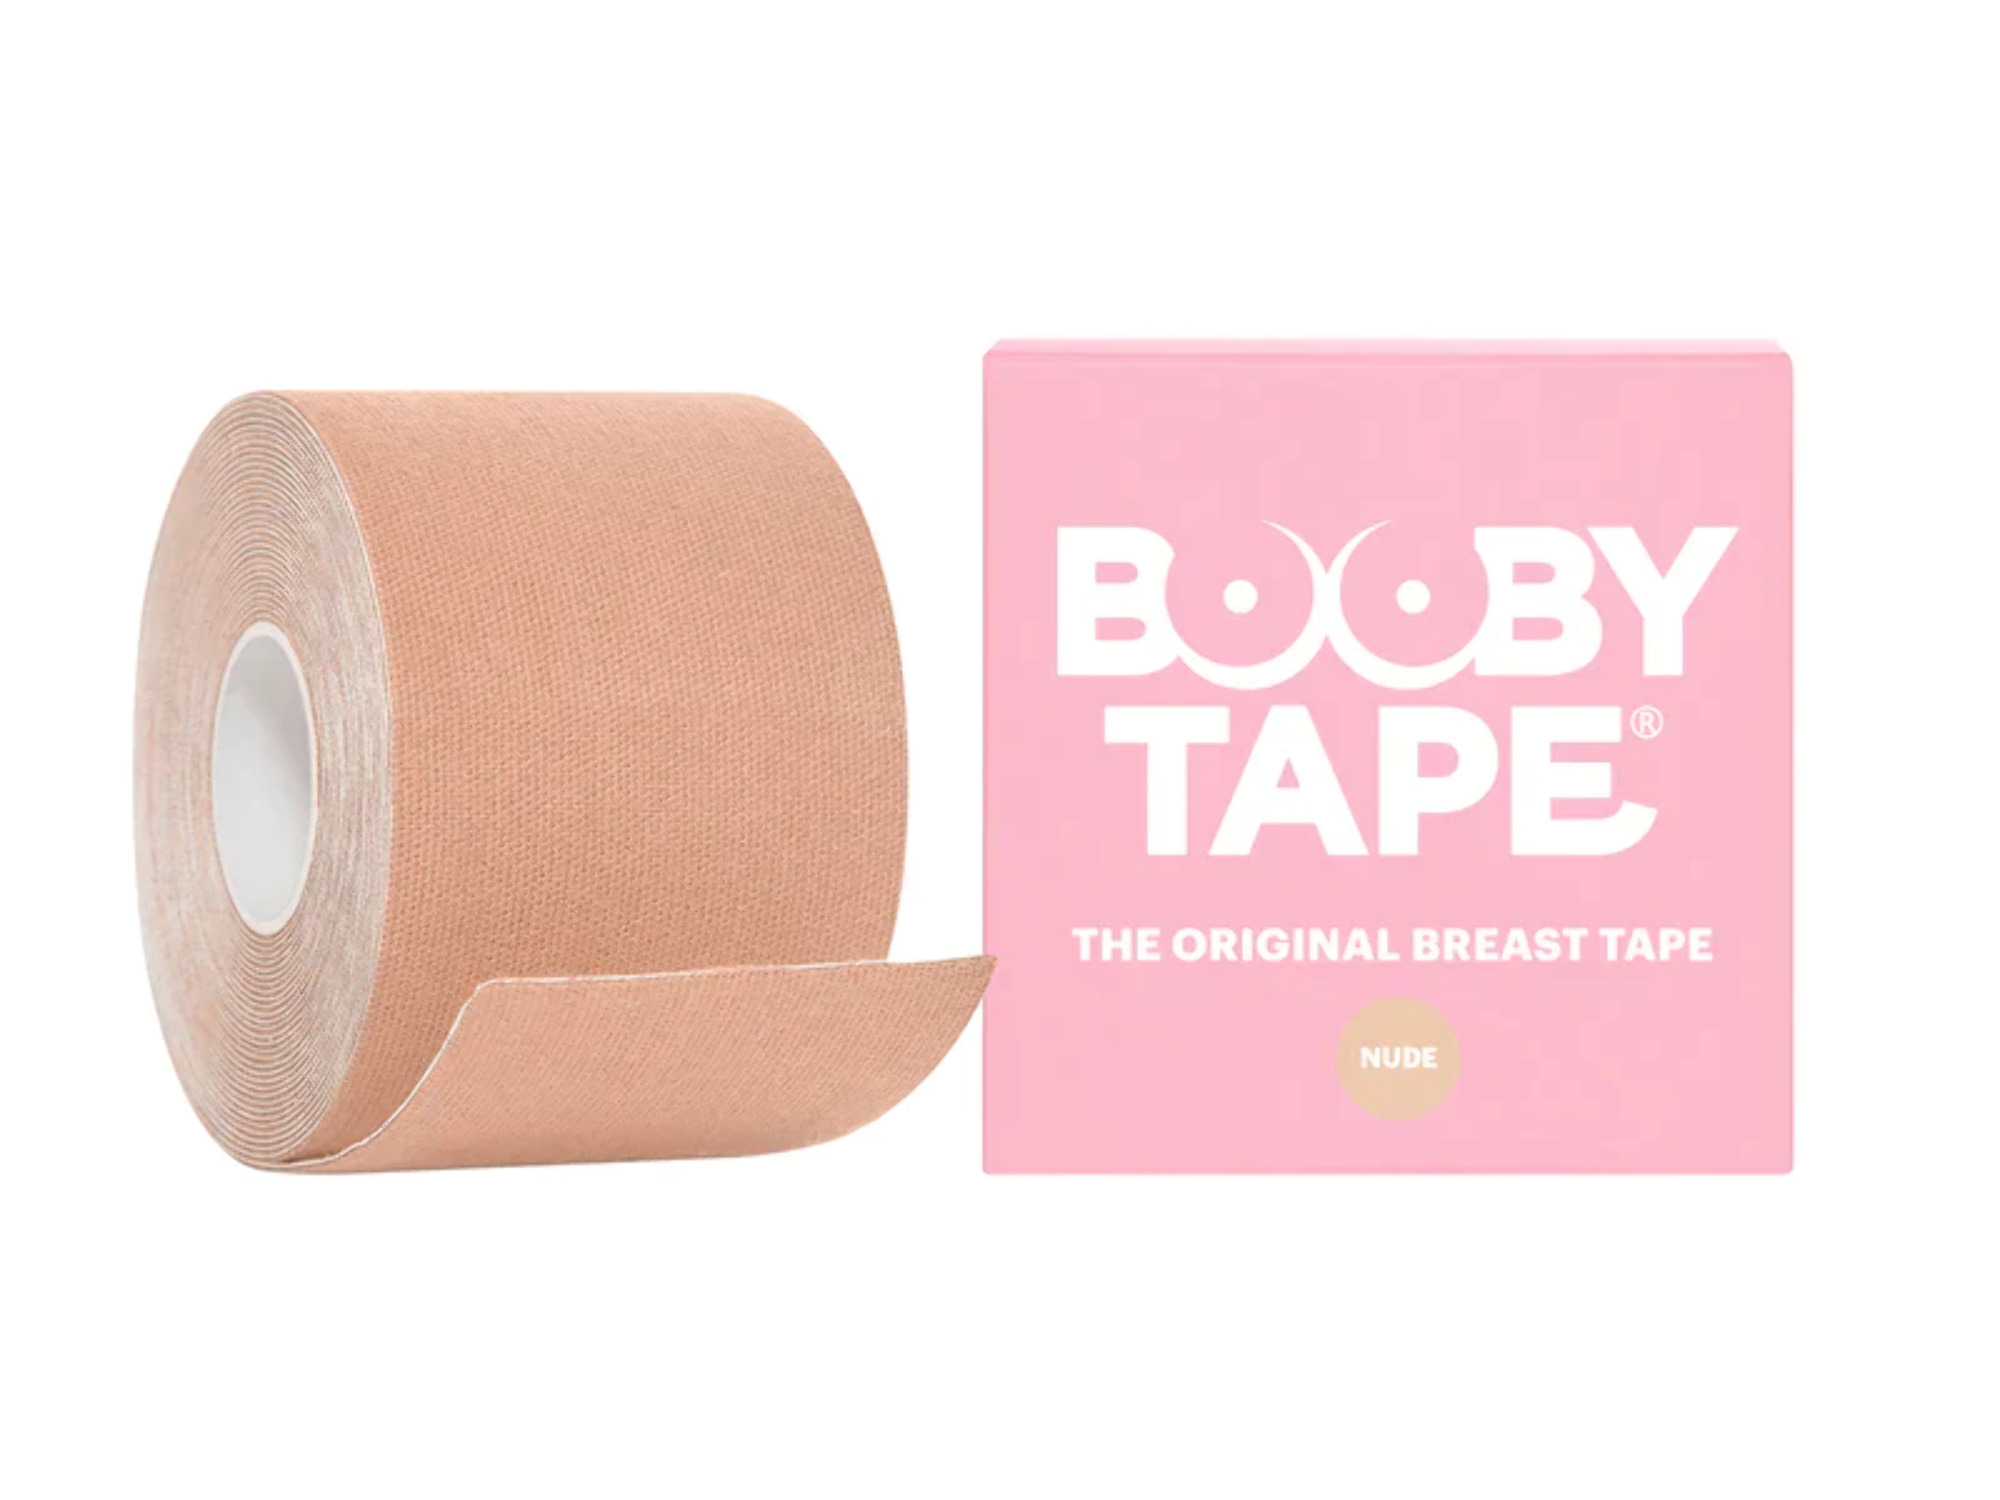 Booby Tape, The Original Breat Lift Tape, Sticky Boob Adhesive Tape, Nude/Tan, 5 meter roll - image 1 of 3